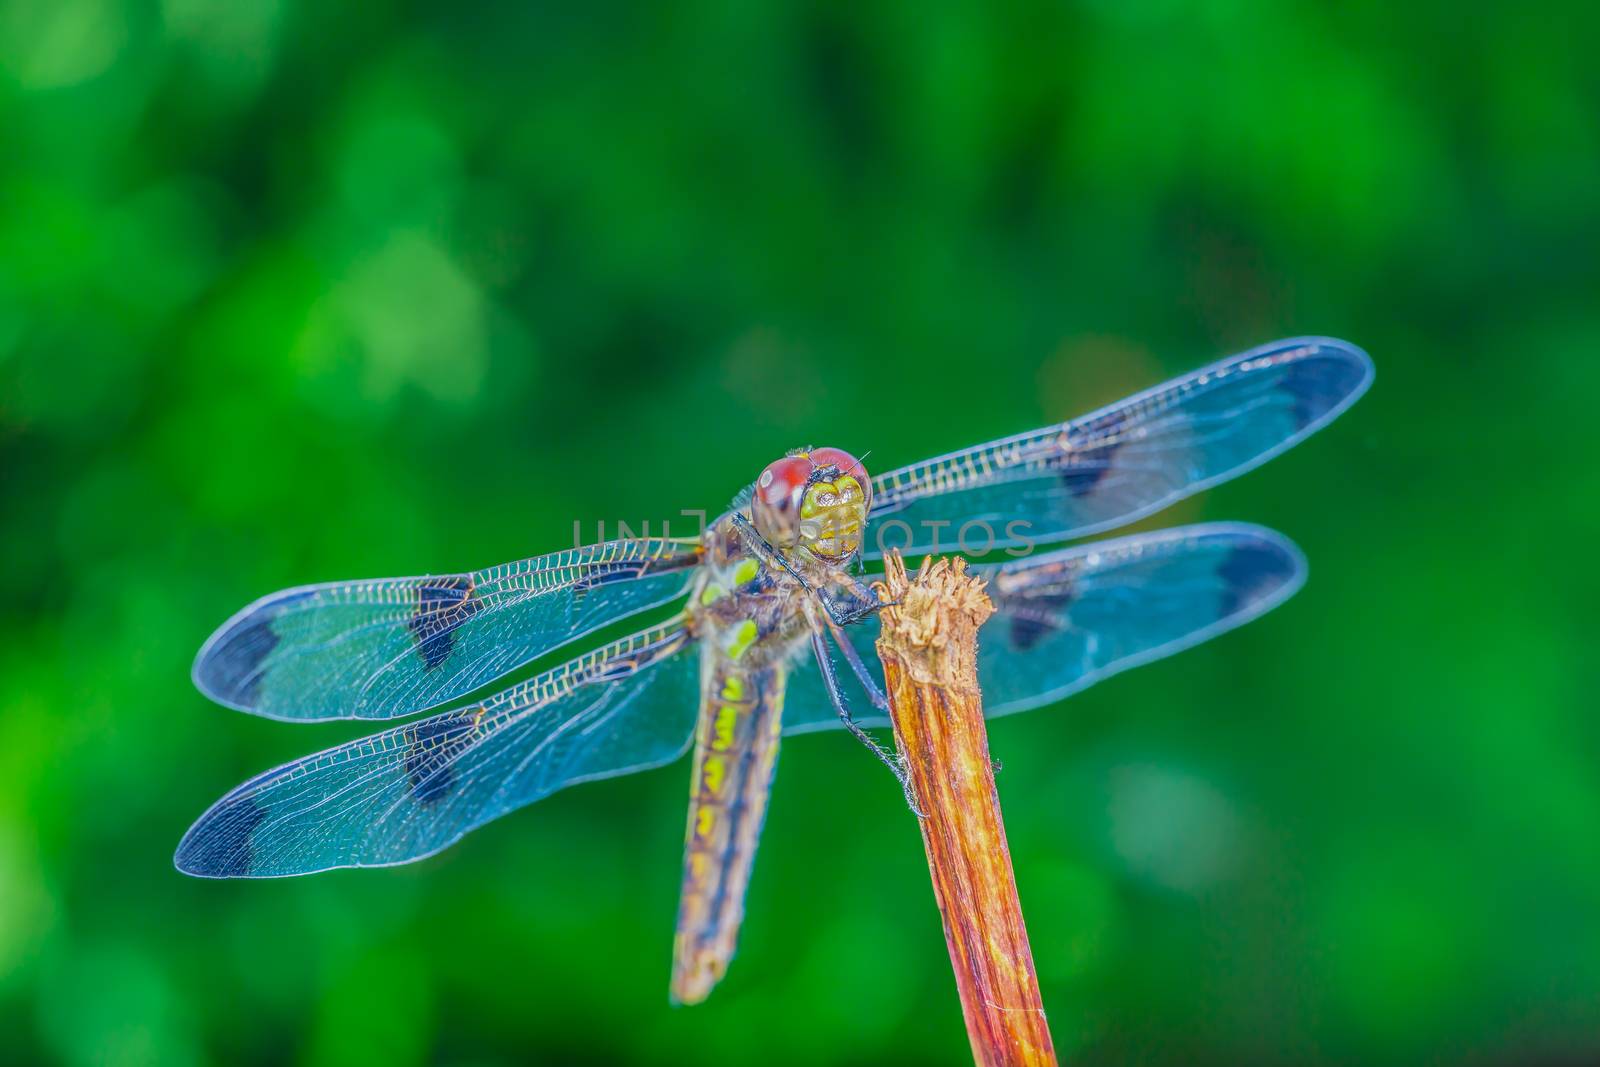 A really beautiful blue winged dragonfly in the wild, Ontario, Canada.